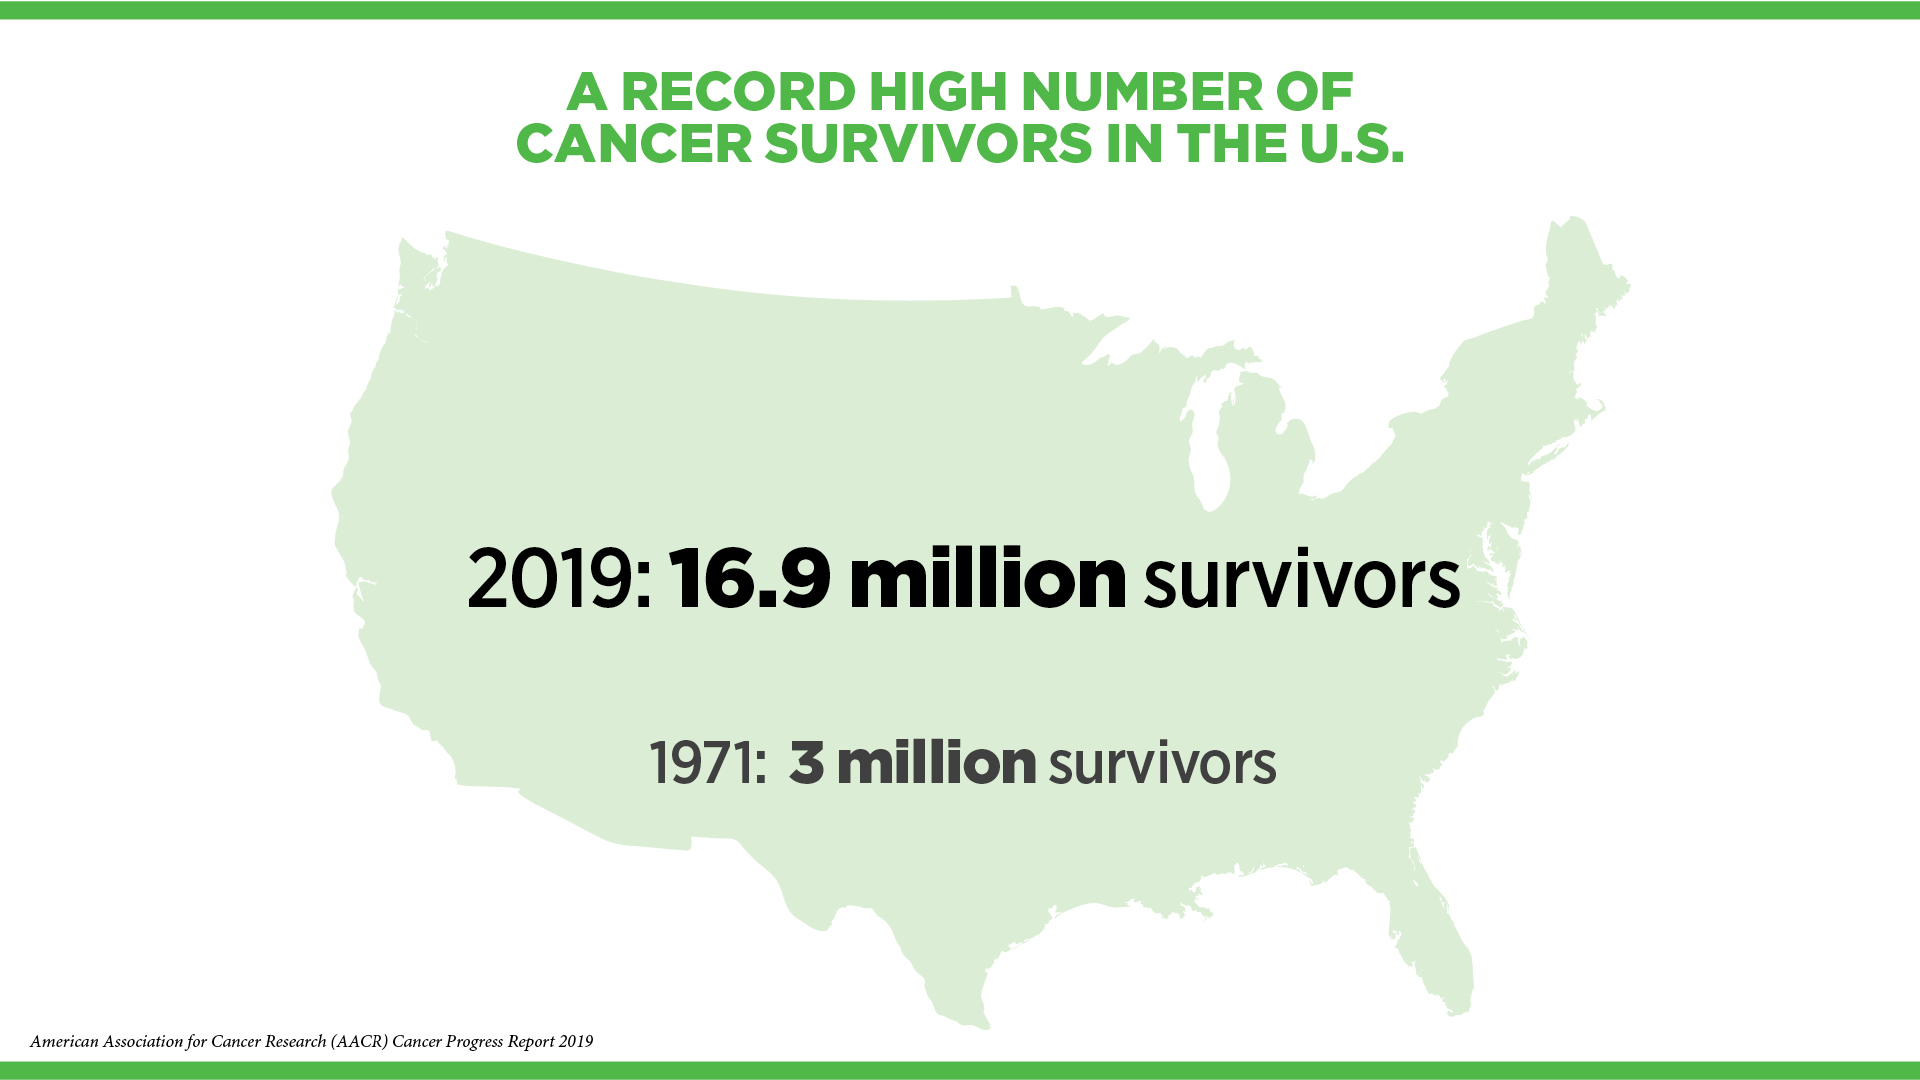 The AACR Cancer Progress Report 2019 details that there are a record high number of cancer survivors in the United States